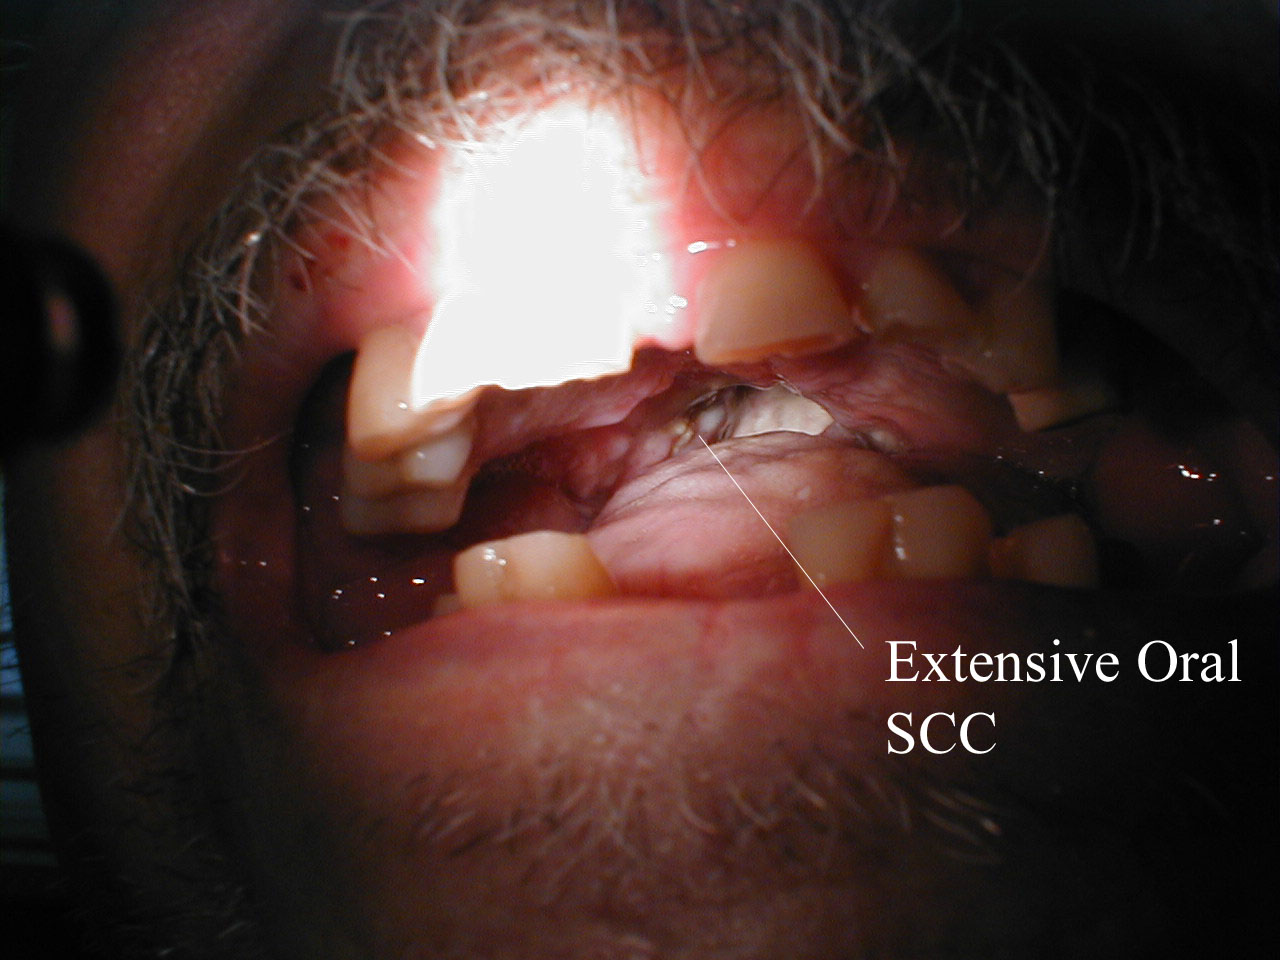 Squamous Cell Cancer of the Mouth: Irregular, necrotic appearing tissue on the inside of the mouth due to extensive squamous cell cancer. Patient has limited ability to open his mouth (aka trismus) as a result of the infiltrating cancer.